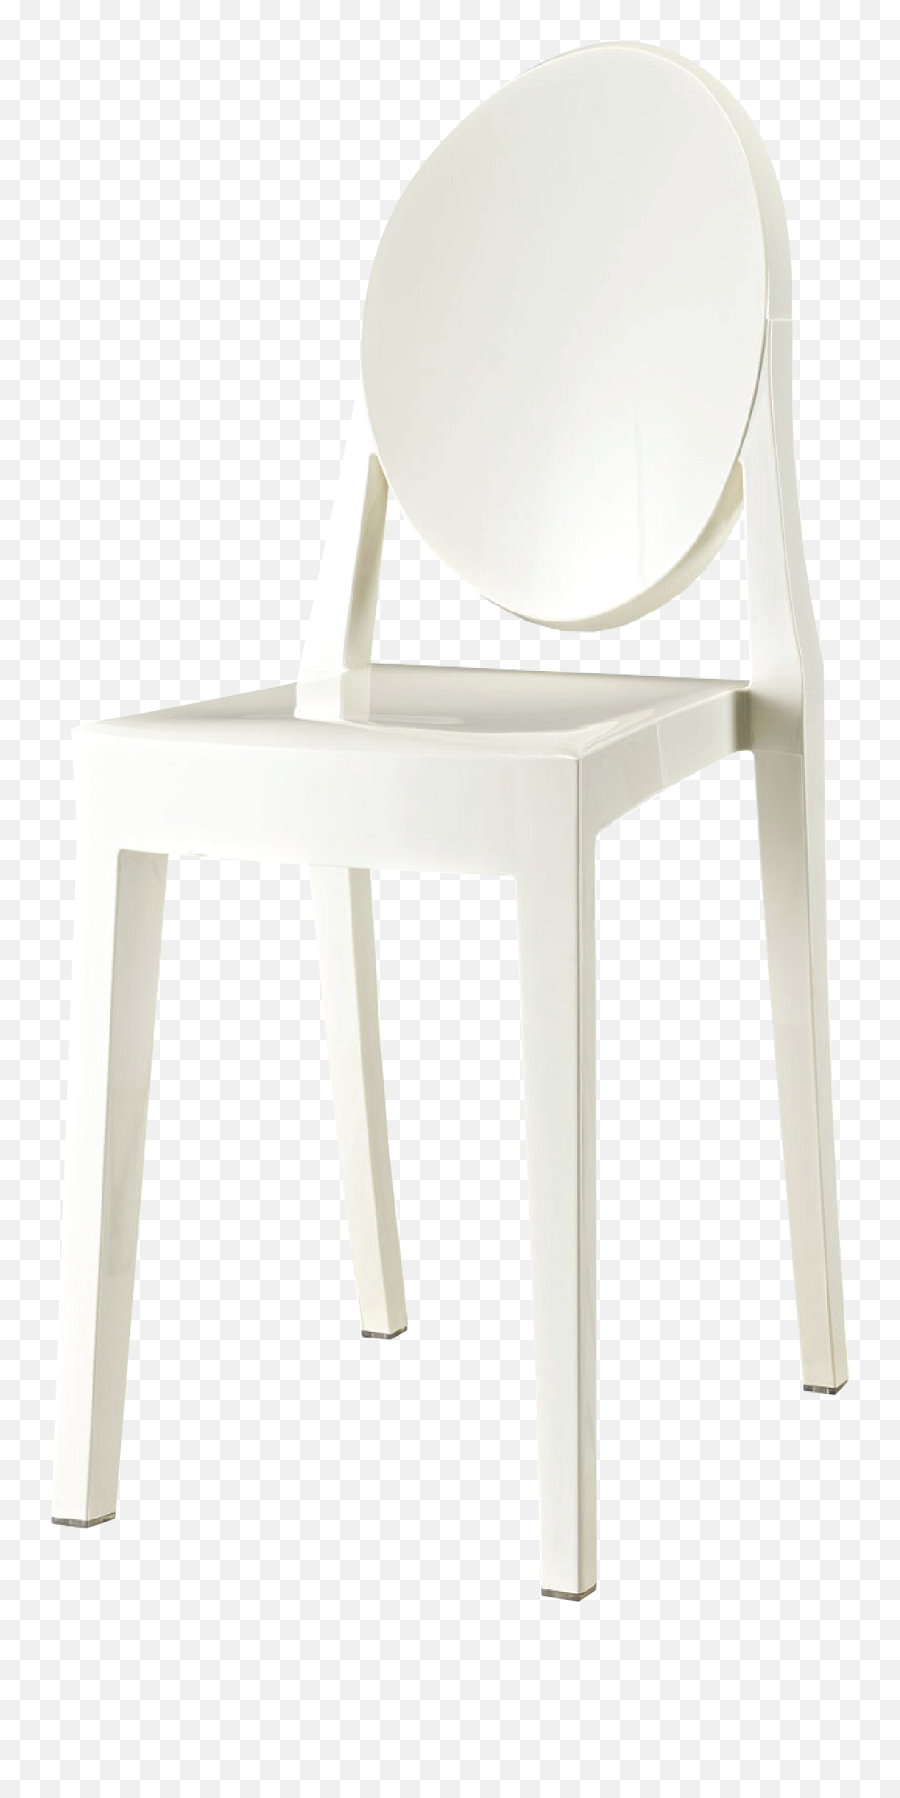 Ghost Chair Png Transparent - Chair,Ghost Transparent Background